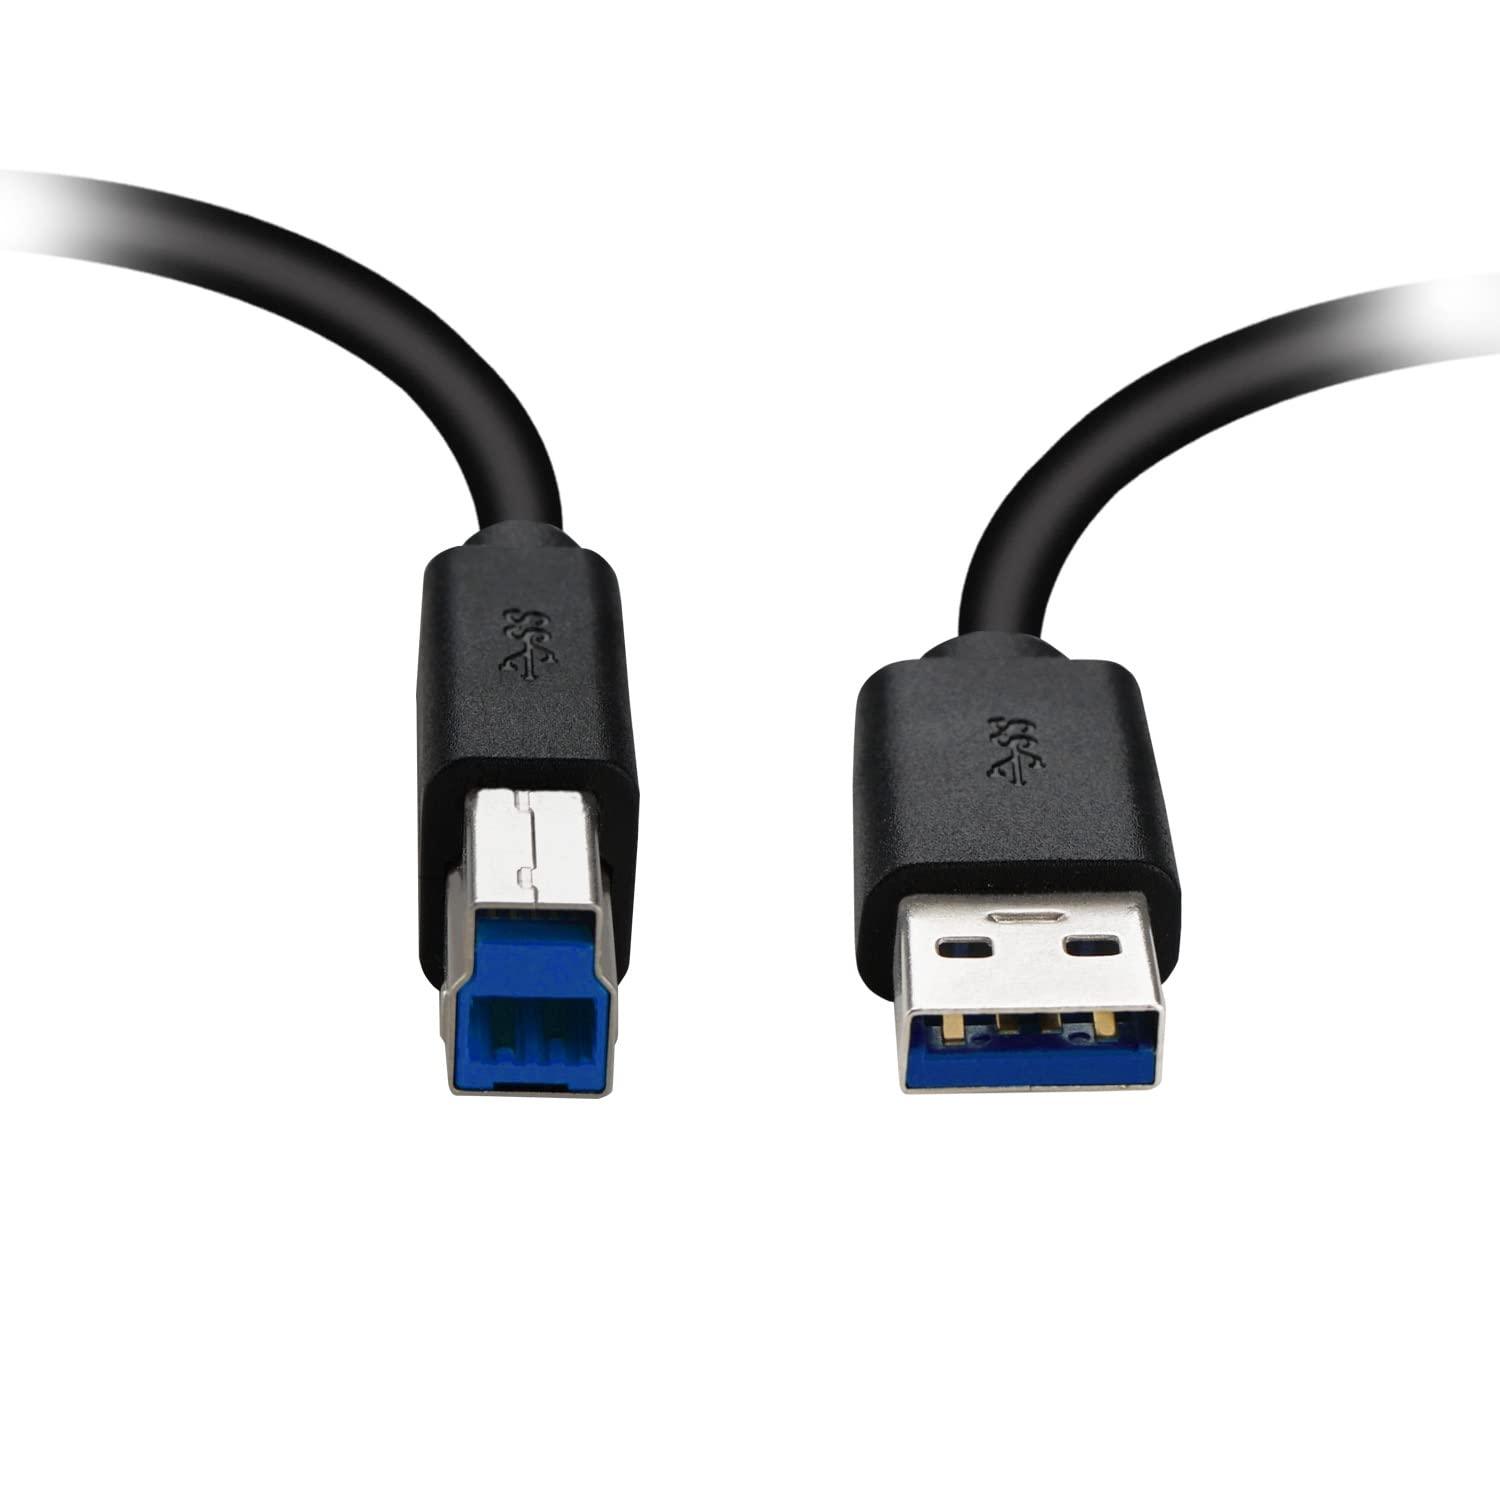 2 Pack USB 3.0 Cable A Male to B Male 4.92 ft, for Scanner, Printers, Desktop External Hard Drivers and More(4.92ft) - CKL KVM Switches